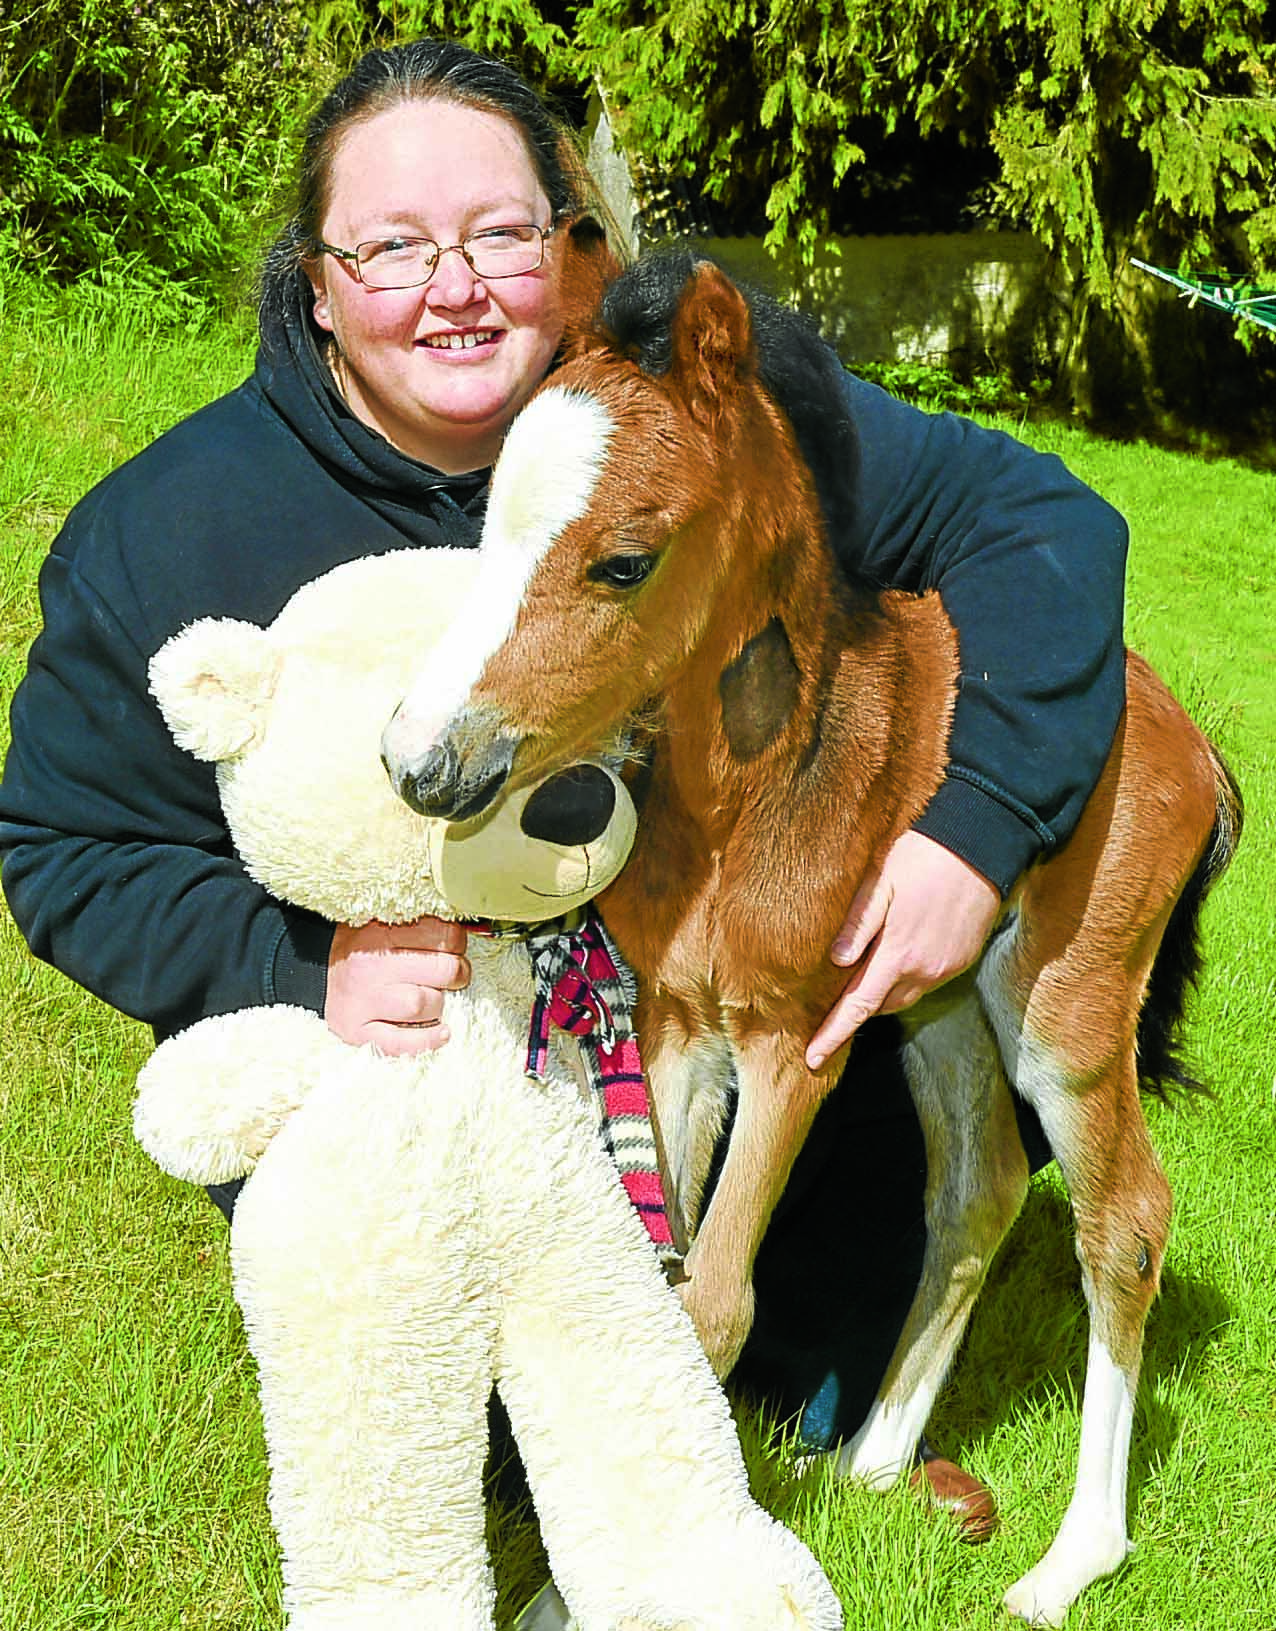 Vet goes above and beyond to save foal